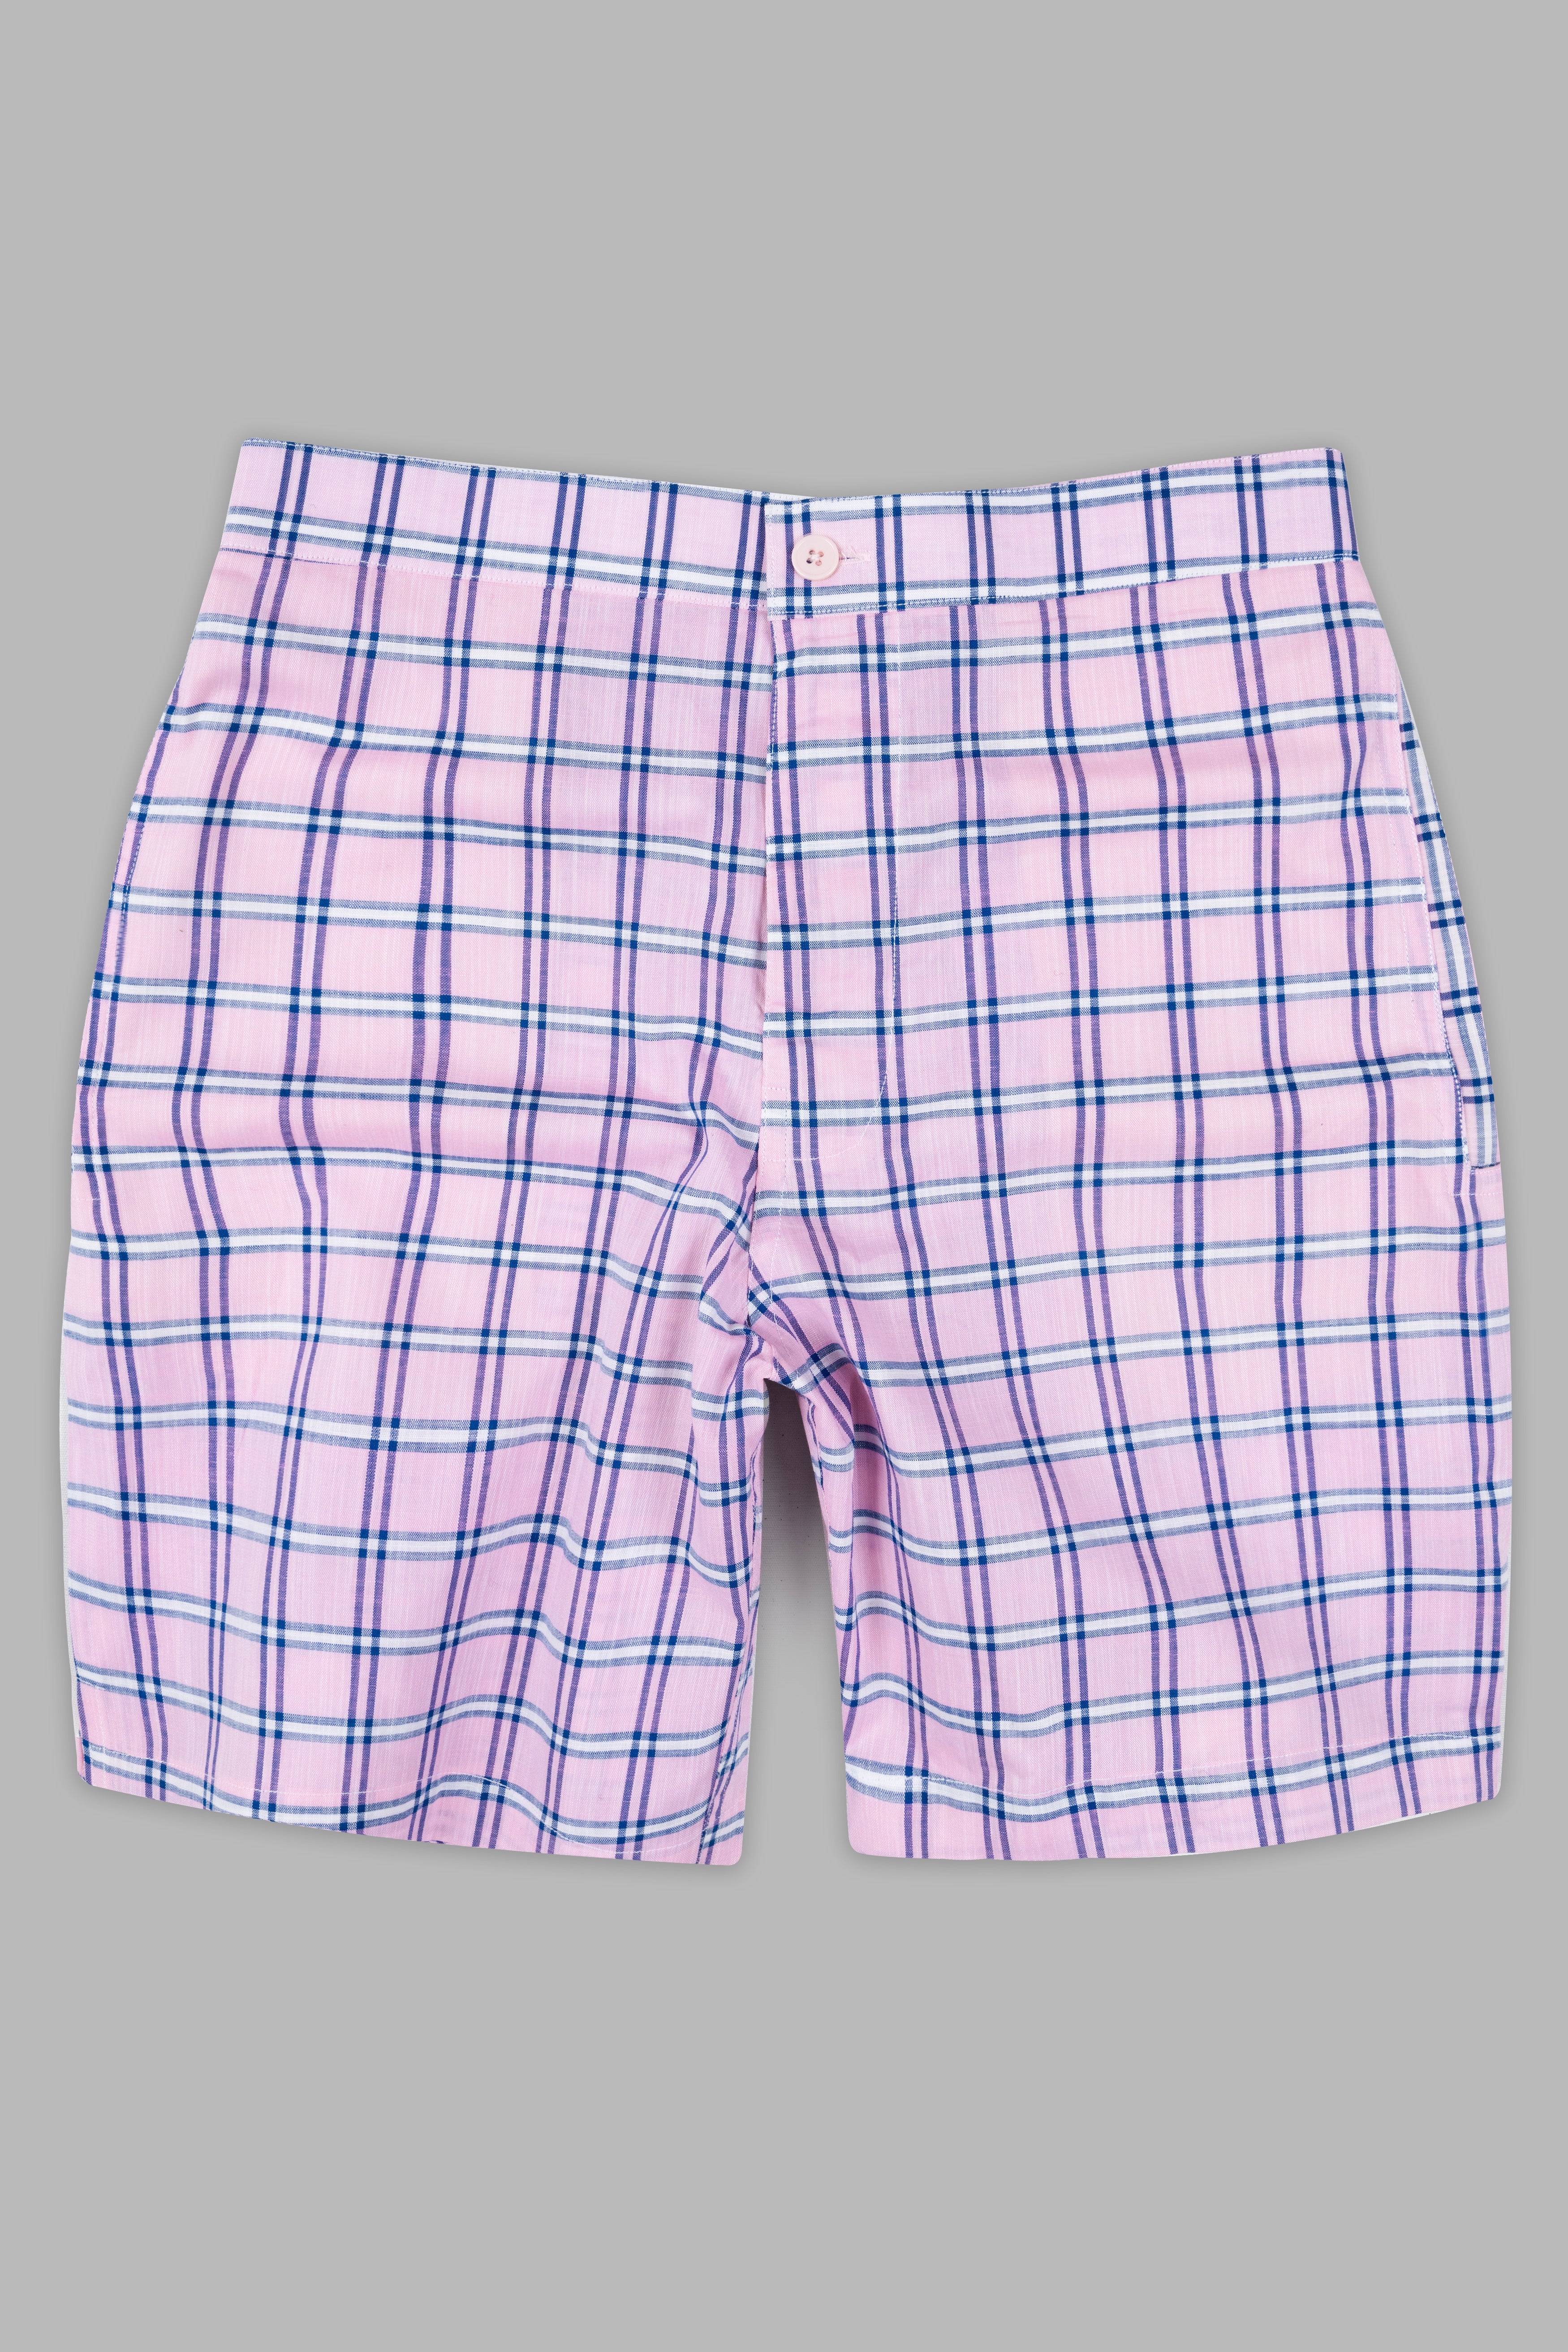 Melanie Pink and Smalt Blue Checkered Chambray Shorts SR375-28, SR375-30, SR375-32, SR375-34, SR375-36, SR375-38, SR375-40, SR375-42, SR375-44